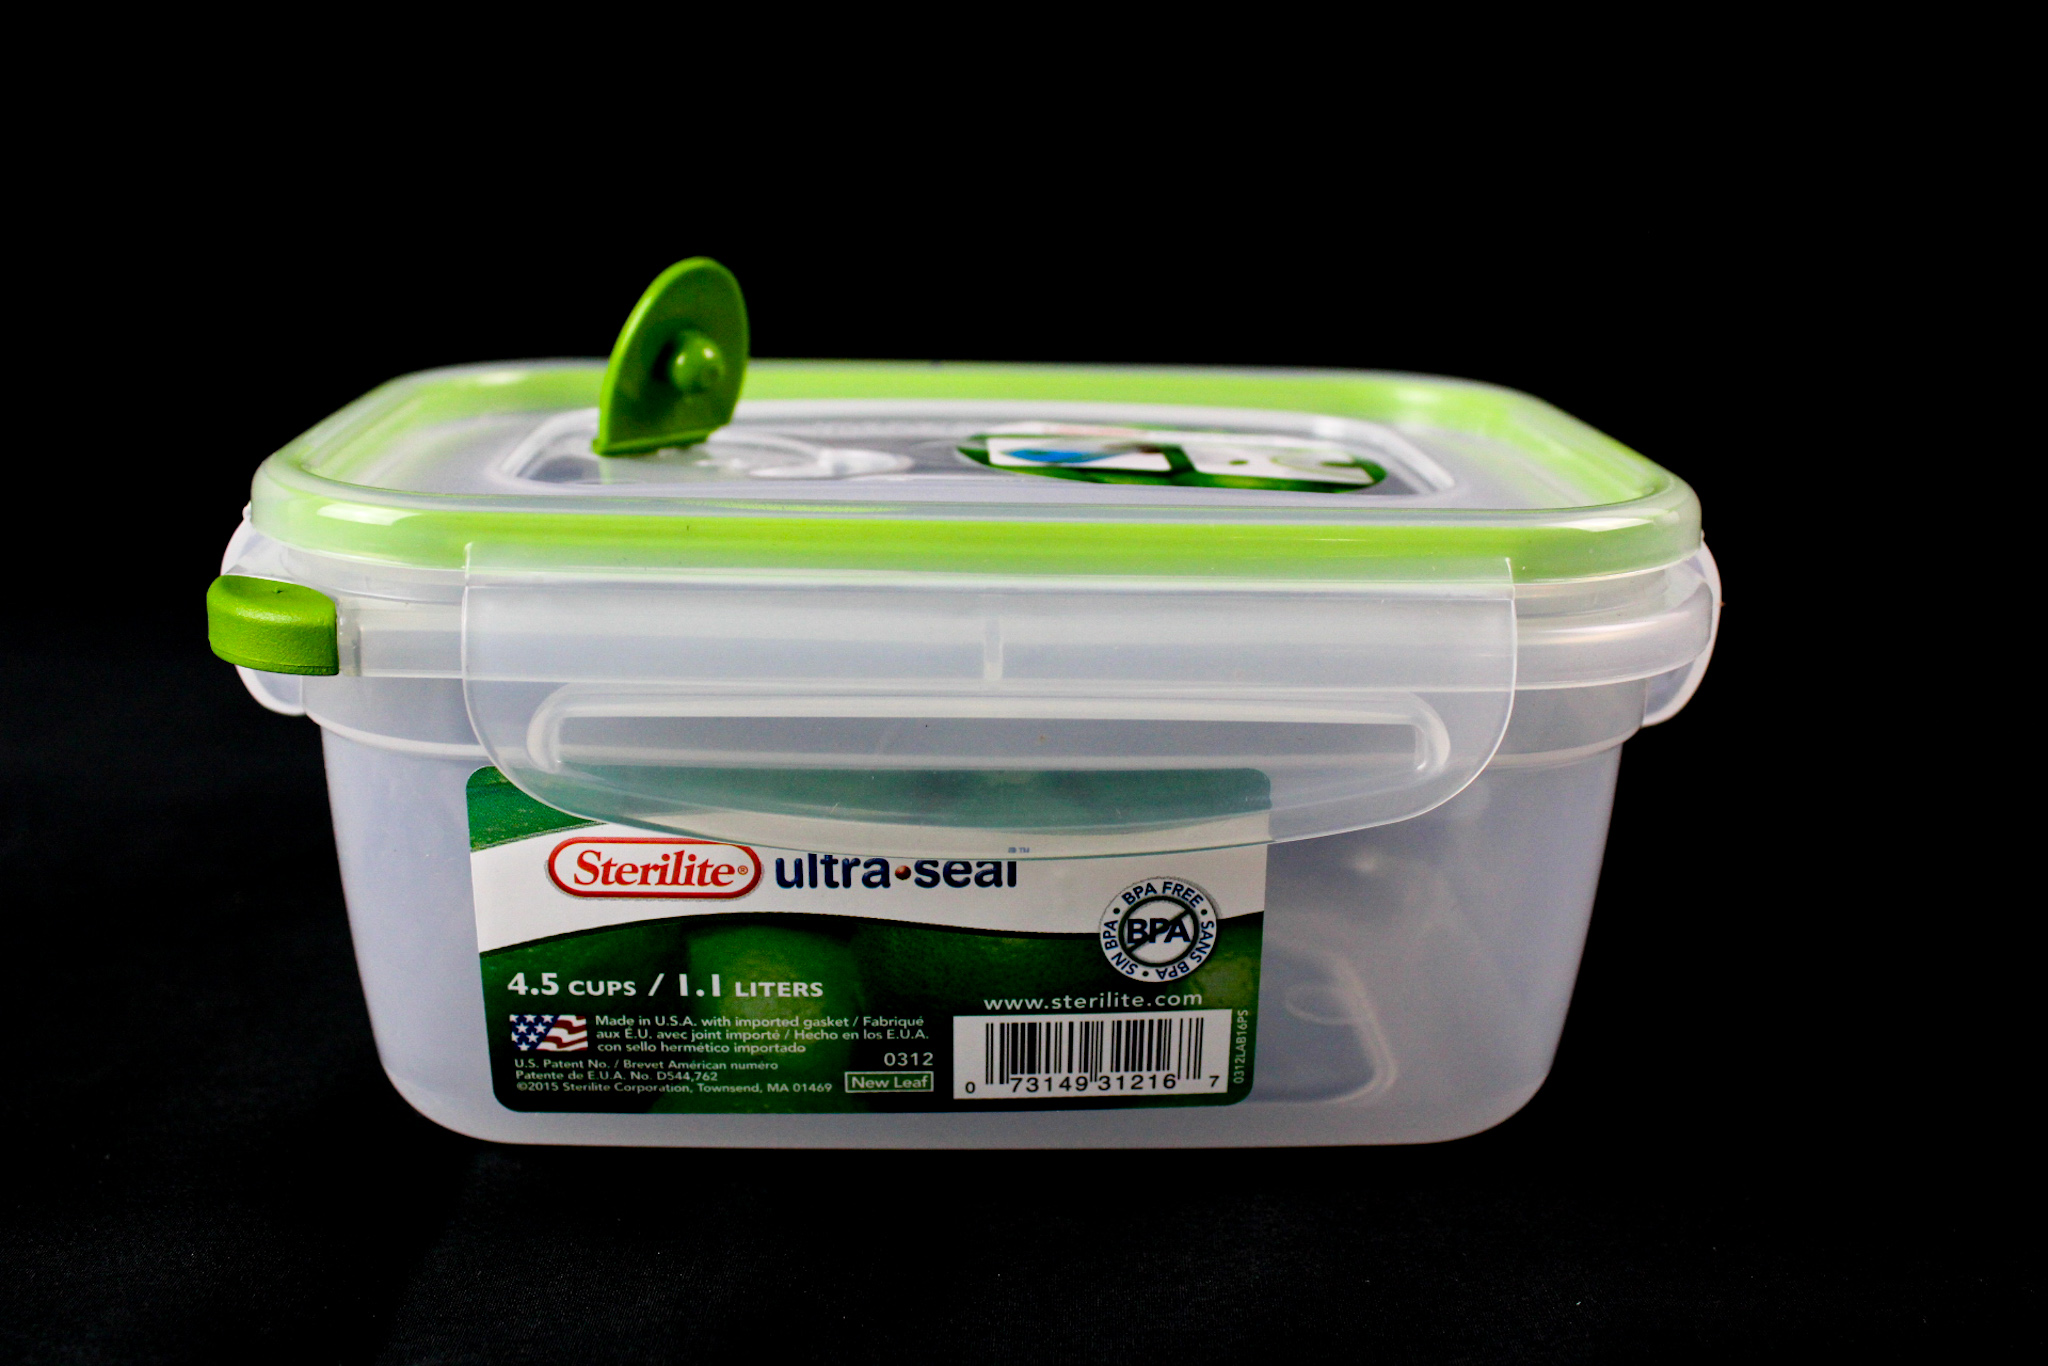 Sterilite - Clinton Sc 03121606 4.5 Cups Rectangle Ultra-Seal Container - image 3 of 6